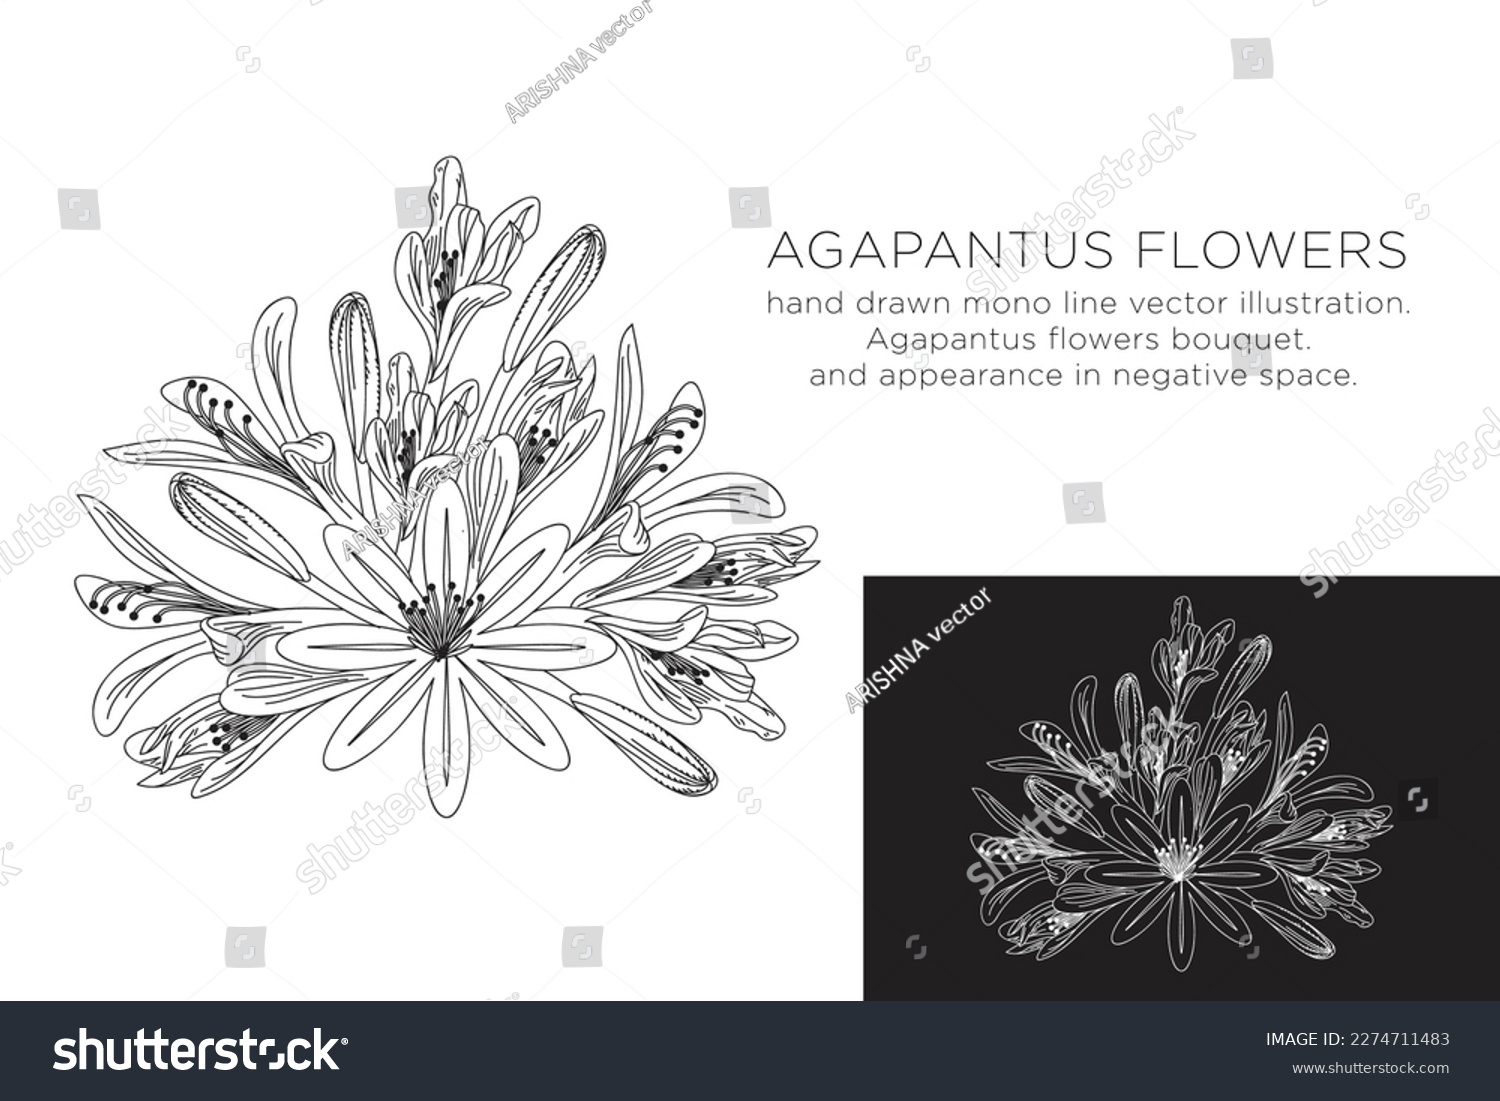 SVG of hand drawn monoline vector illustration.
argapantus flowers.
with appearance in negative space. svg